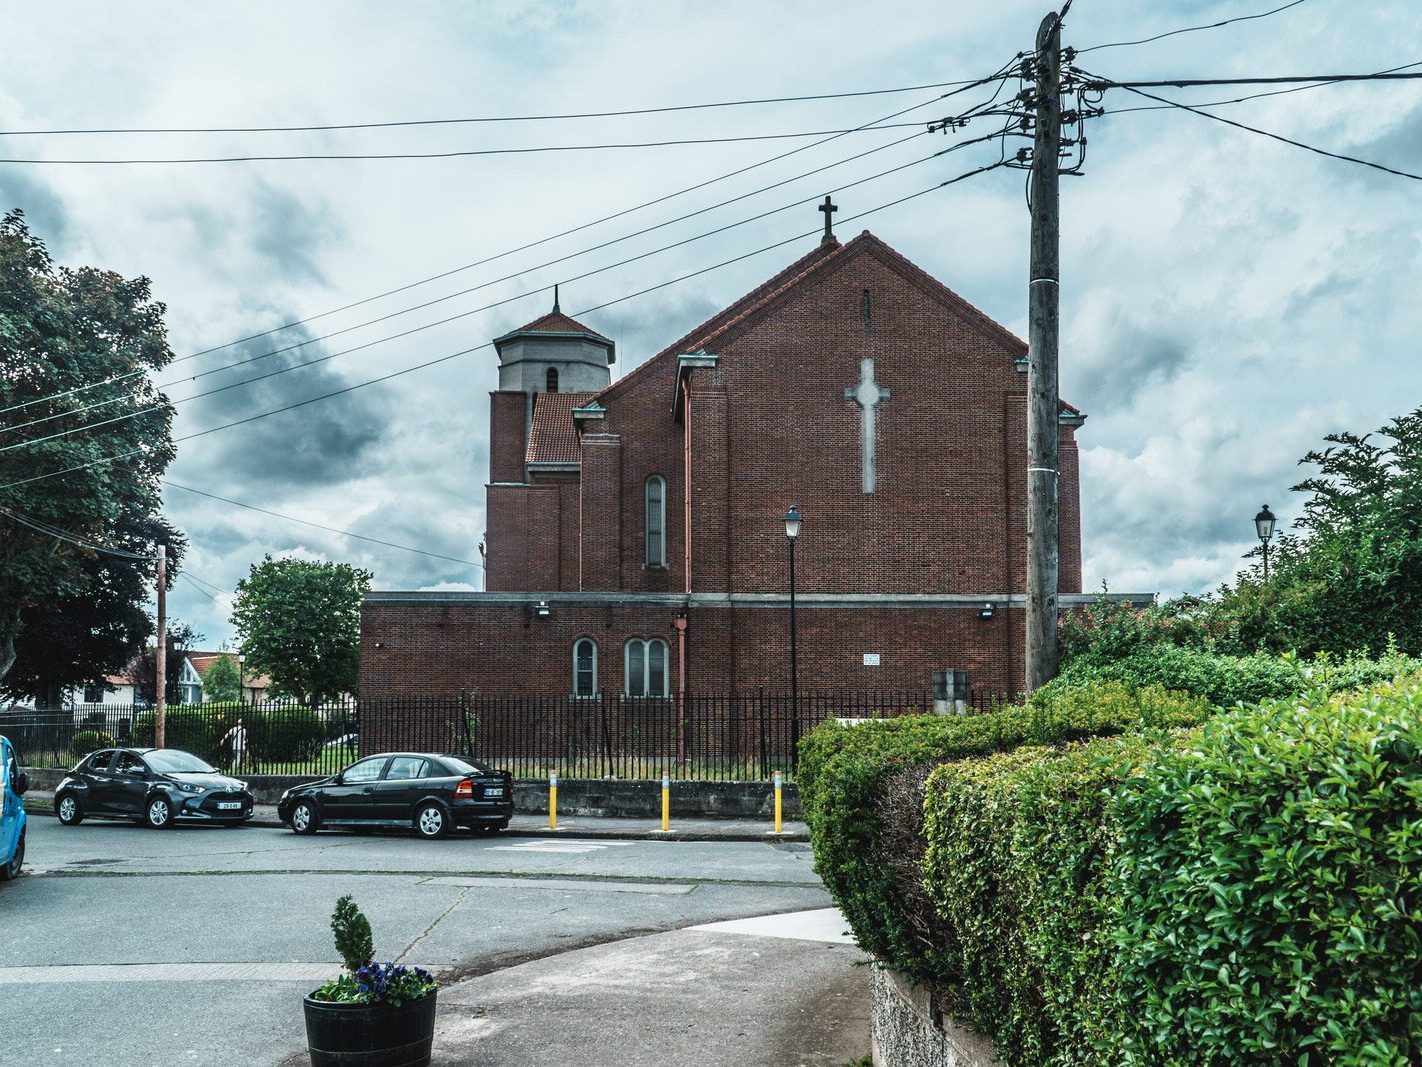 THE AREA OF CABRA NEAR THE CHURCH OF CHRIST THE KING [THE BUILDING IS ON OFFALY ROAD AND THERE IS A SCHOOL NEXT TO IT] 008